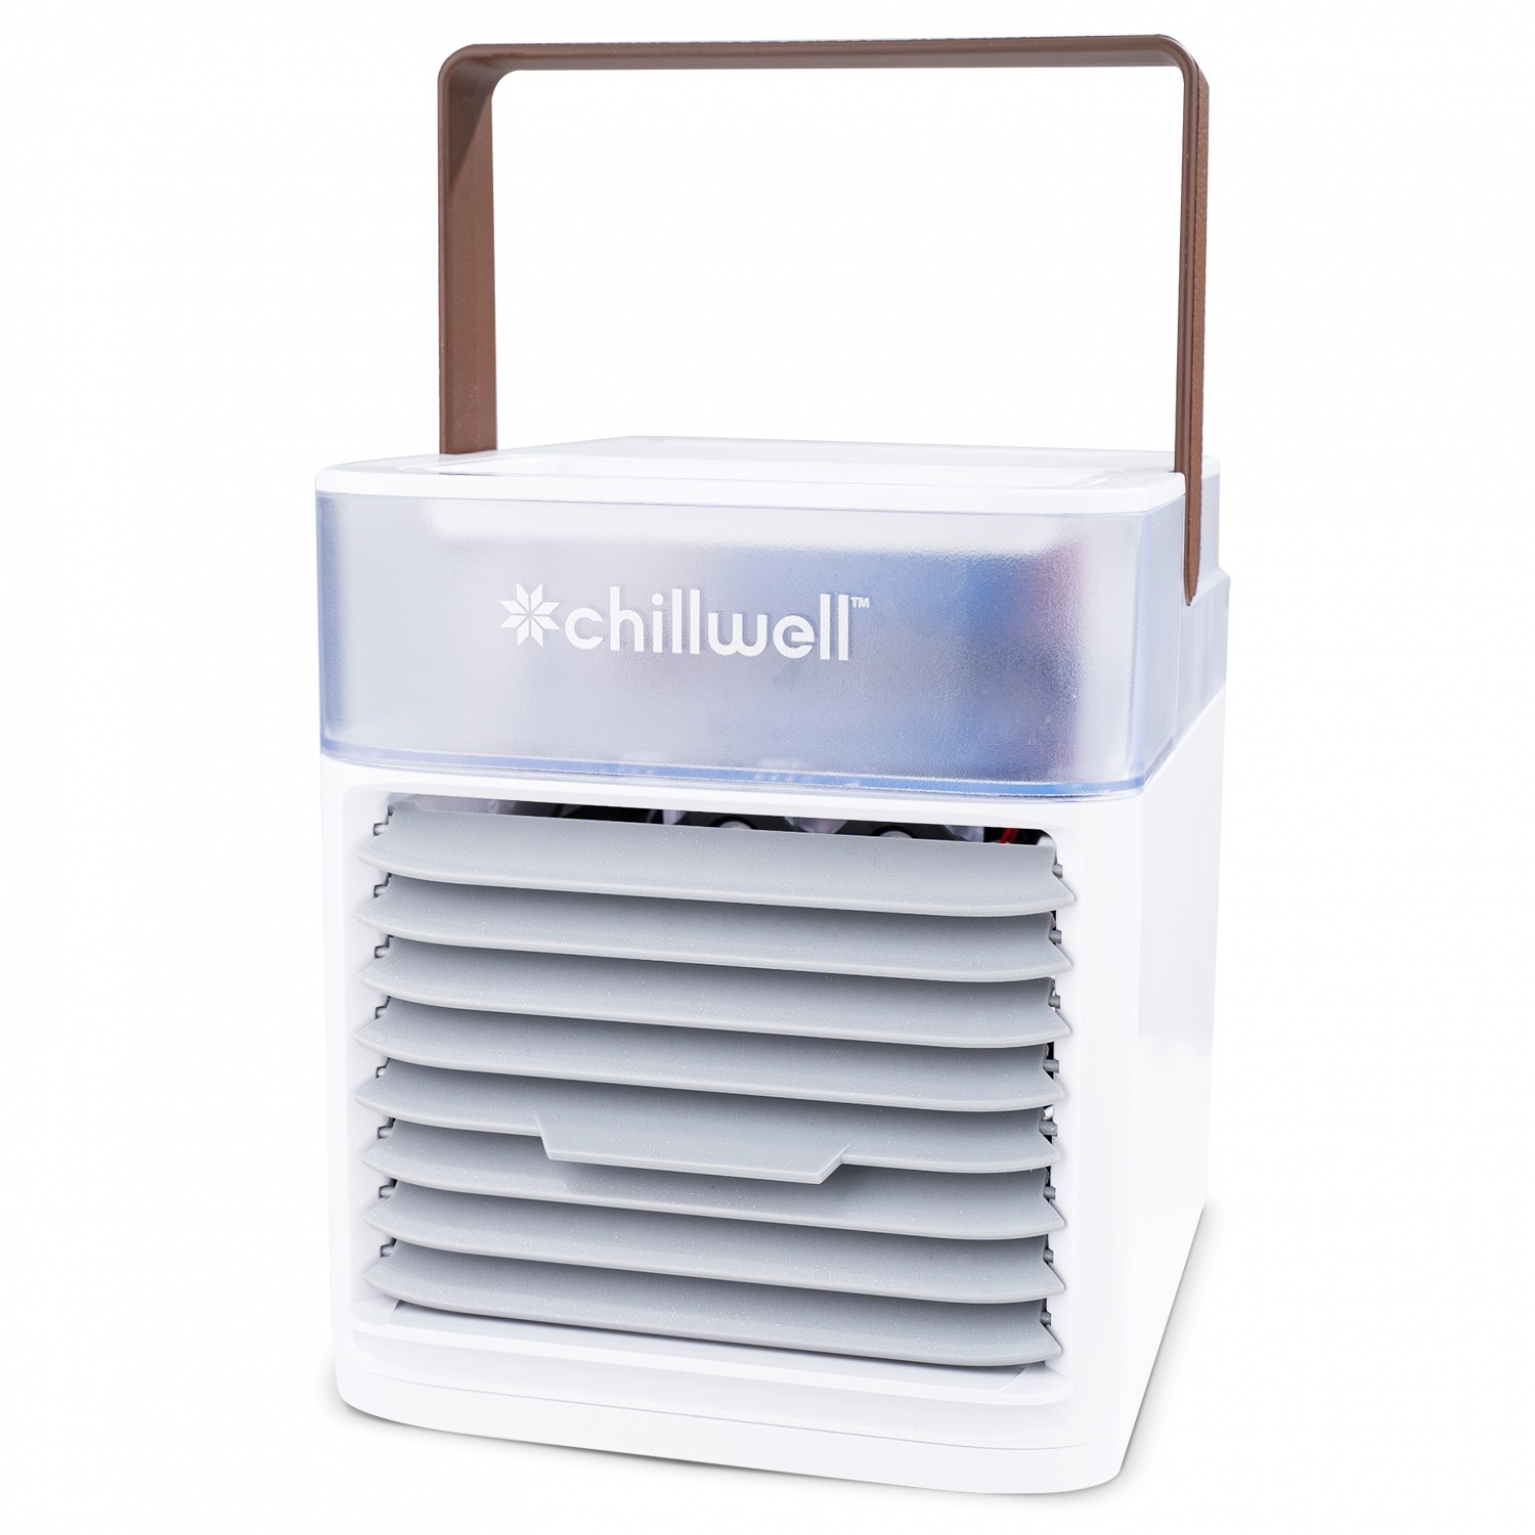 Chillwell Ac Free Delivery